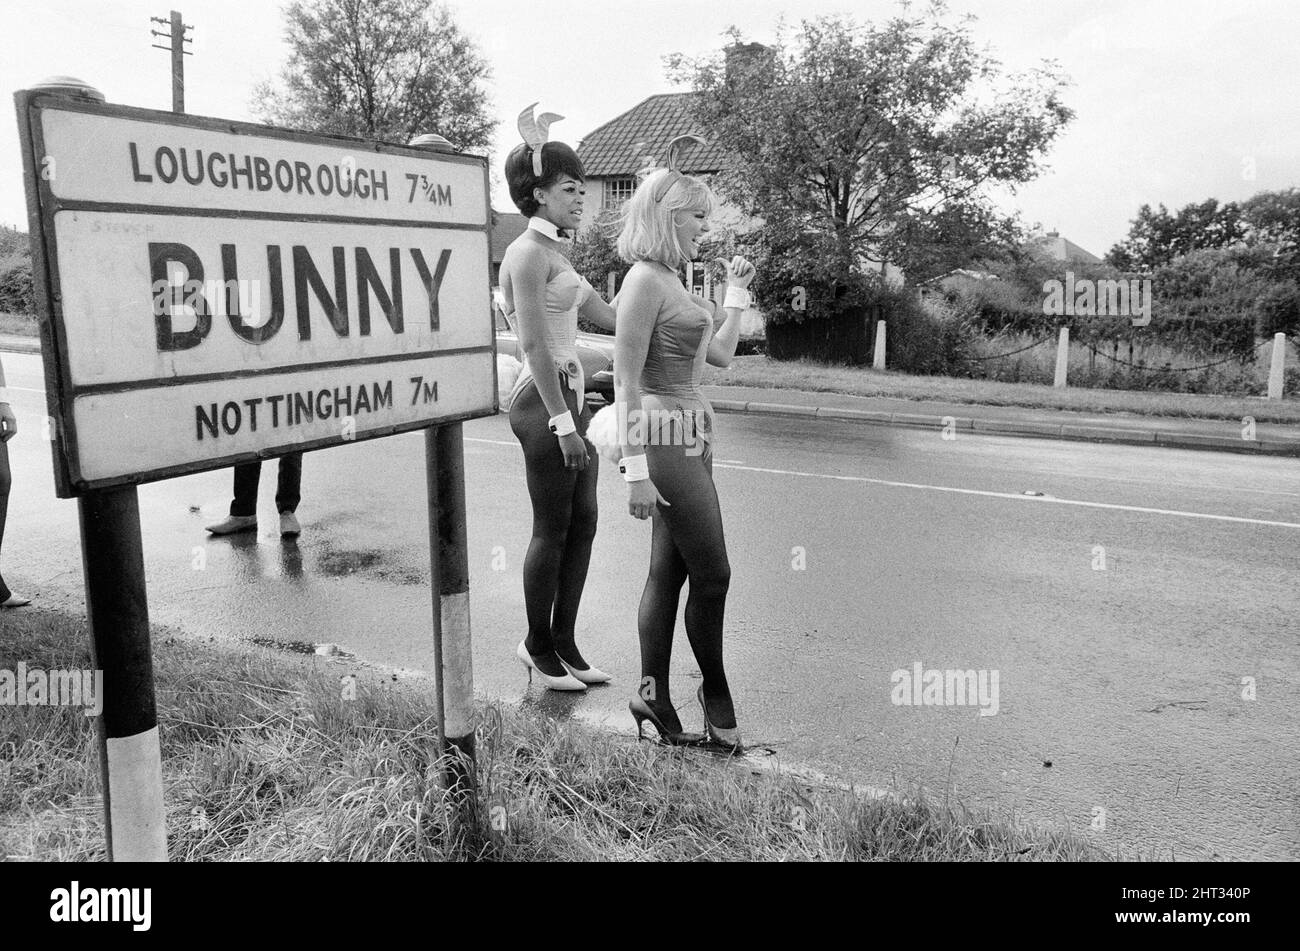 Bunny Girls from the Playboy Club in London visit Bunny, a village and civil parish in the Rushcliffe borough of Nottinghamshire, England, 4th August 1966. Stock Photo